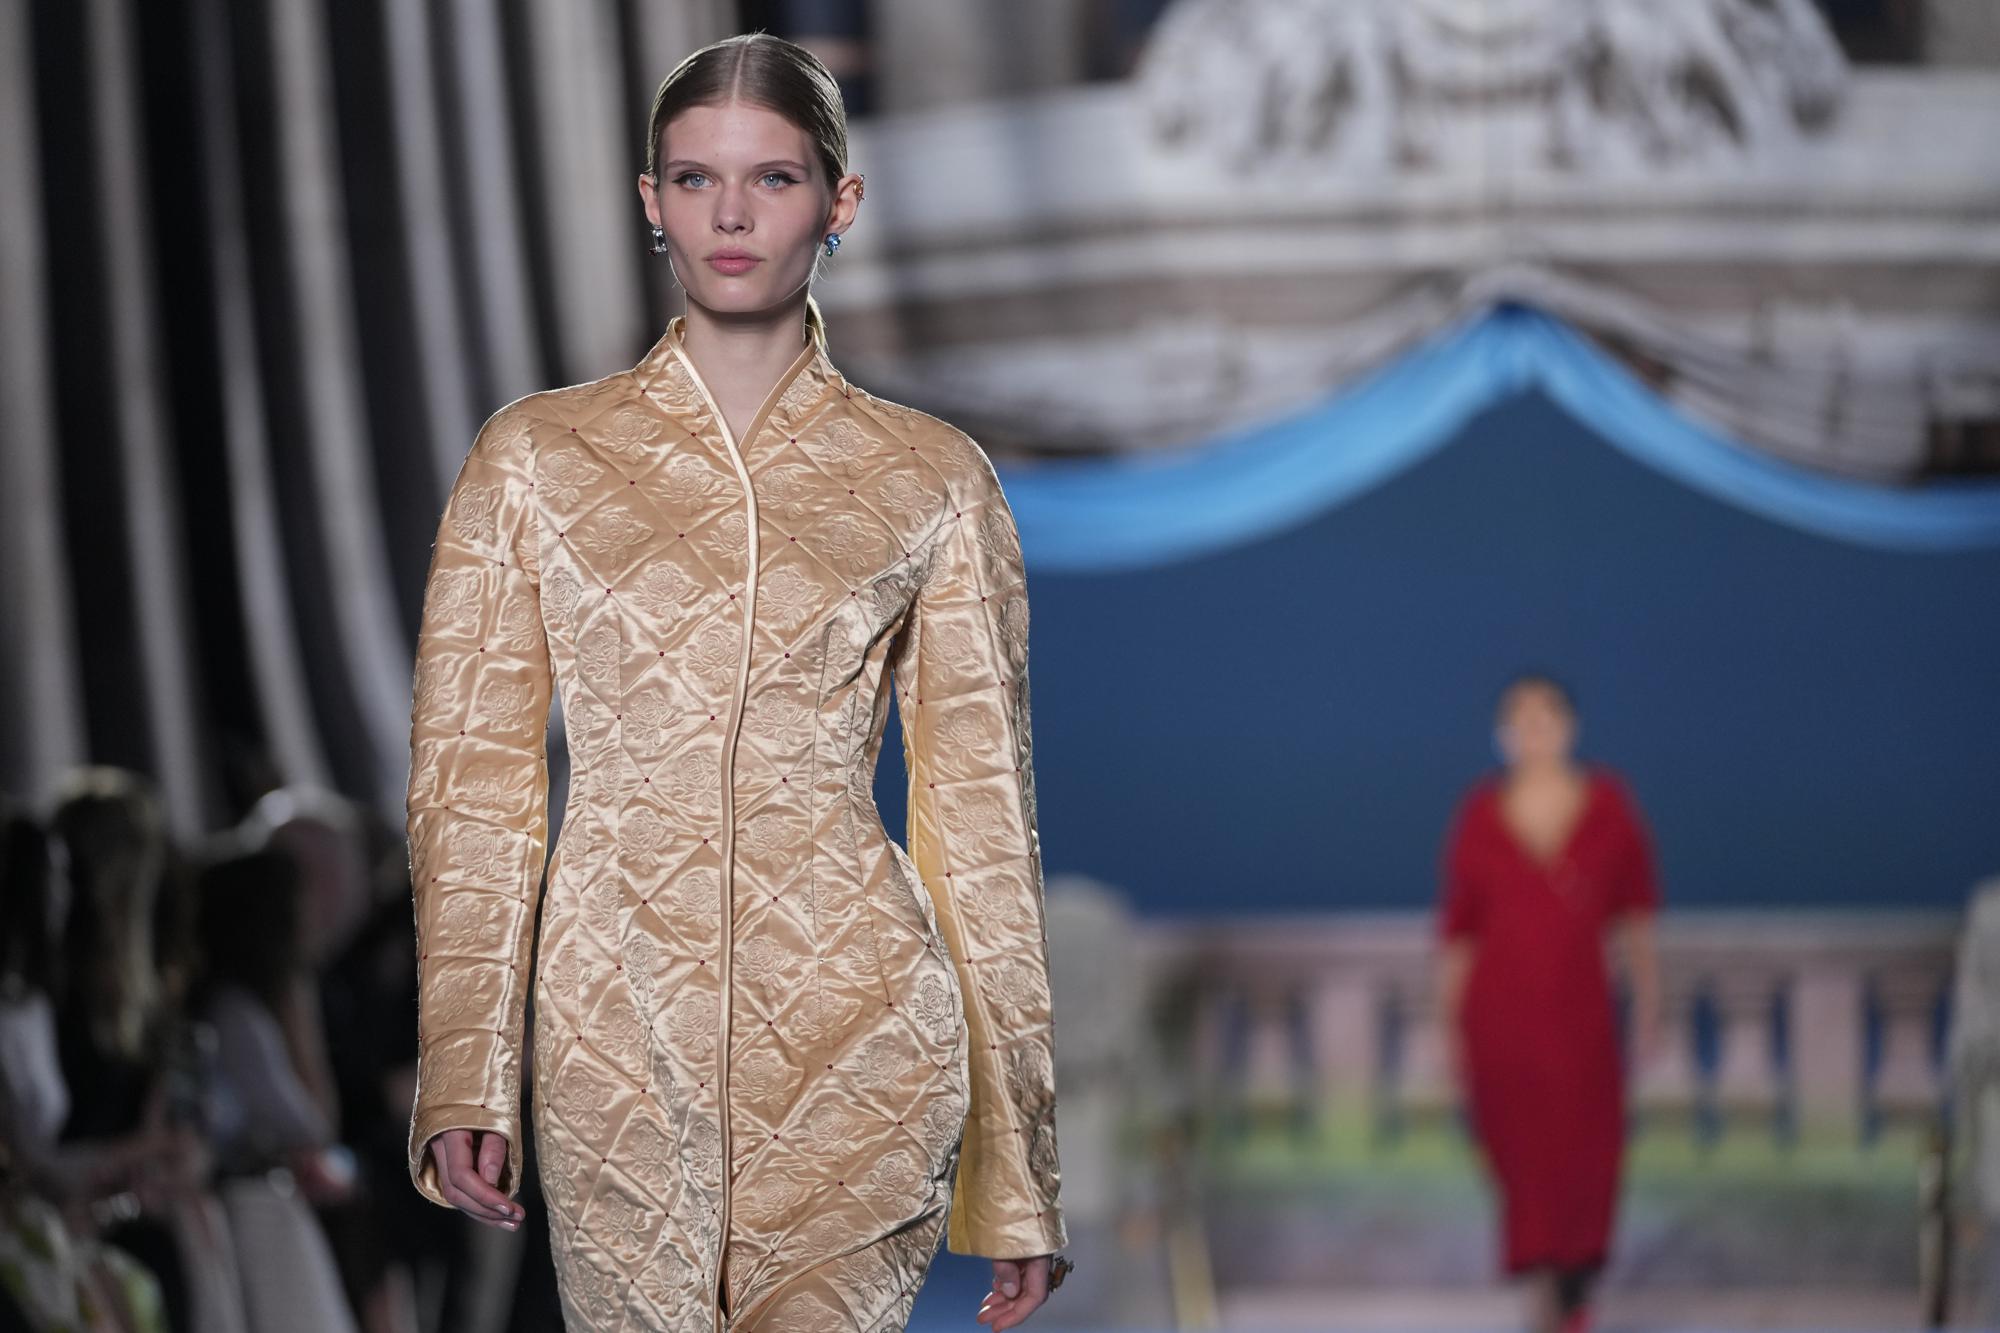 Tory Burch deconstructs classic style in new NYFW collection | AP News